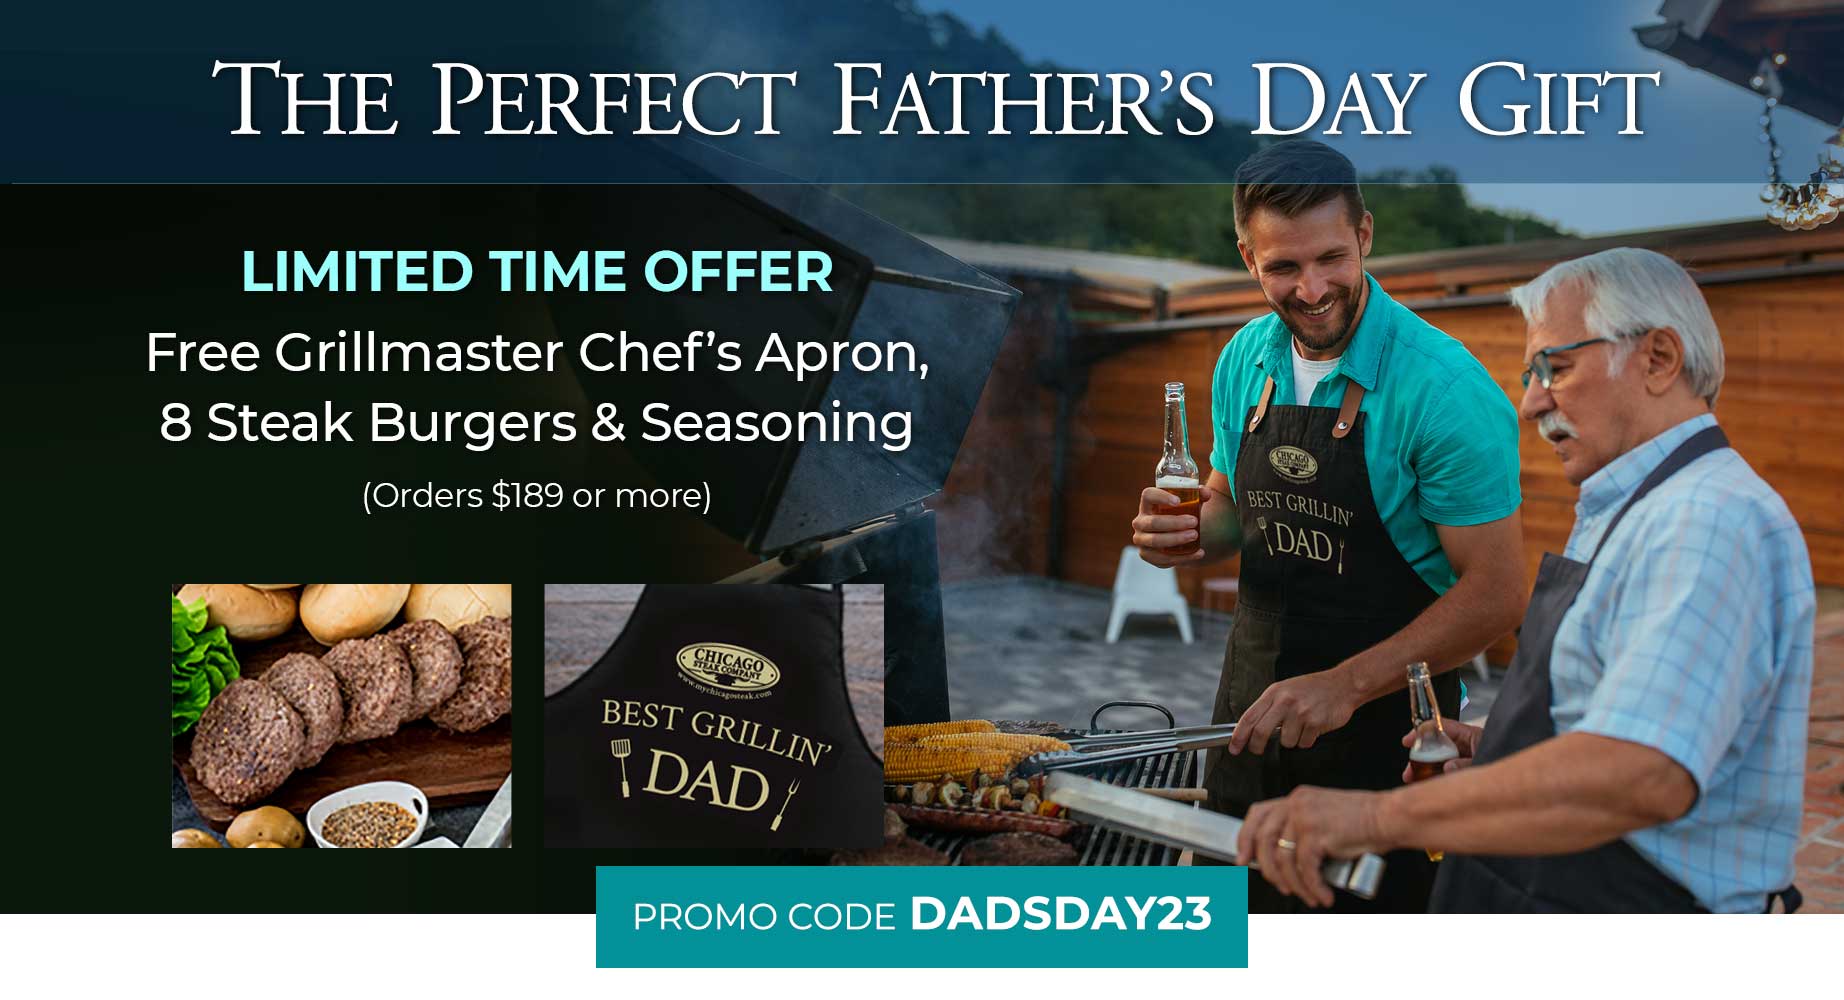 THE PERFECT FATHER'S DAY GIFT- Limited time offer: FREE standard shipping + Free Grillmaster Chef's Apron, 8 Steak Burgers & seasoning - Orders $189 or more Promo Code: DADSDAY23